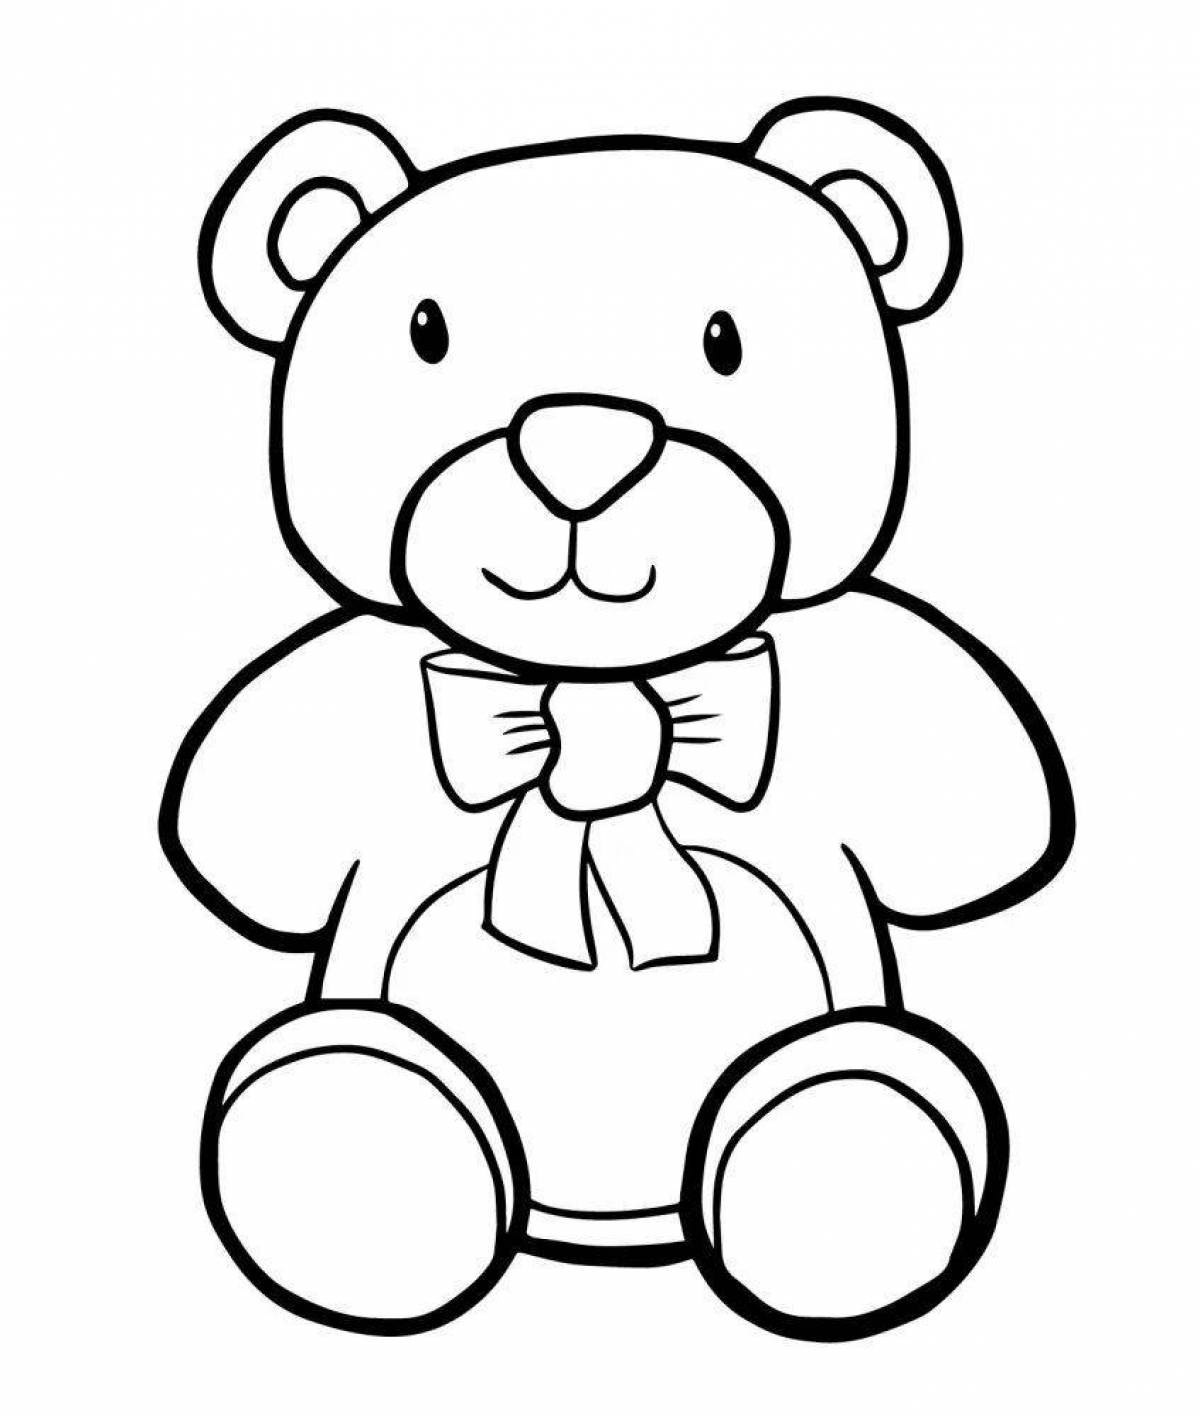 Adorable bear toy coloring page